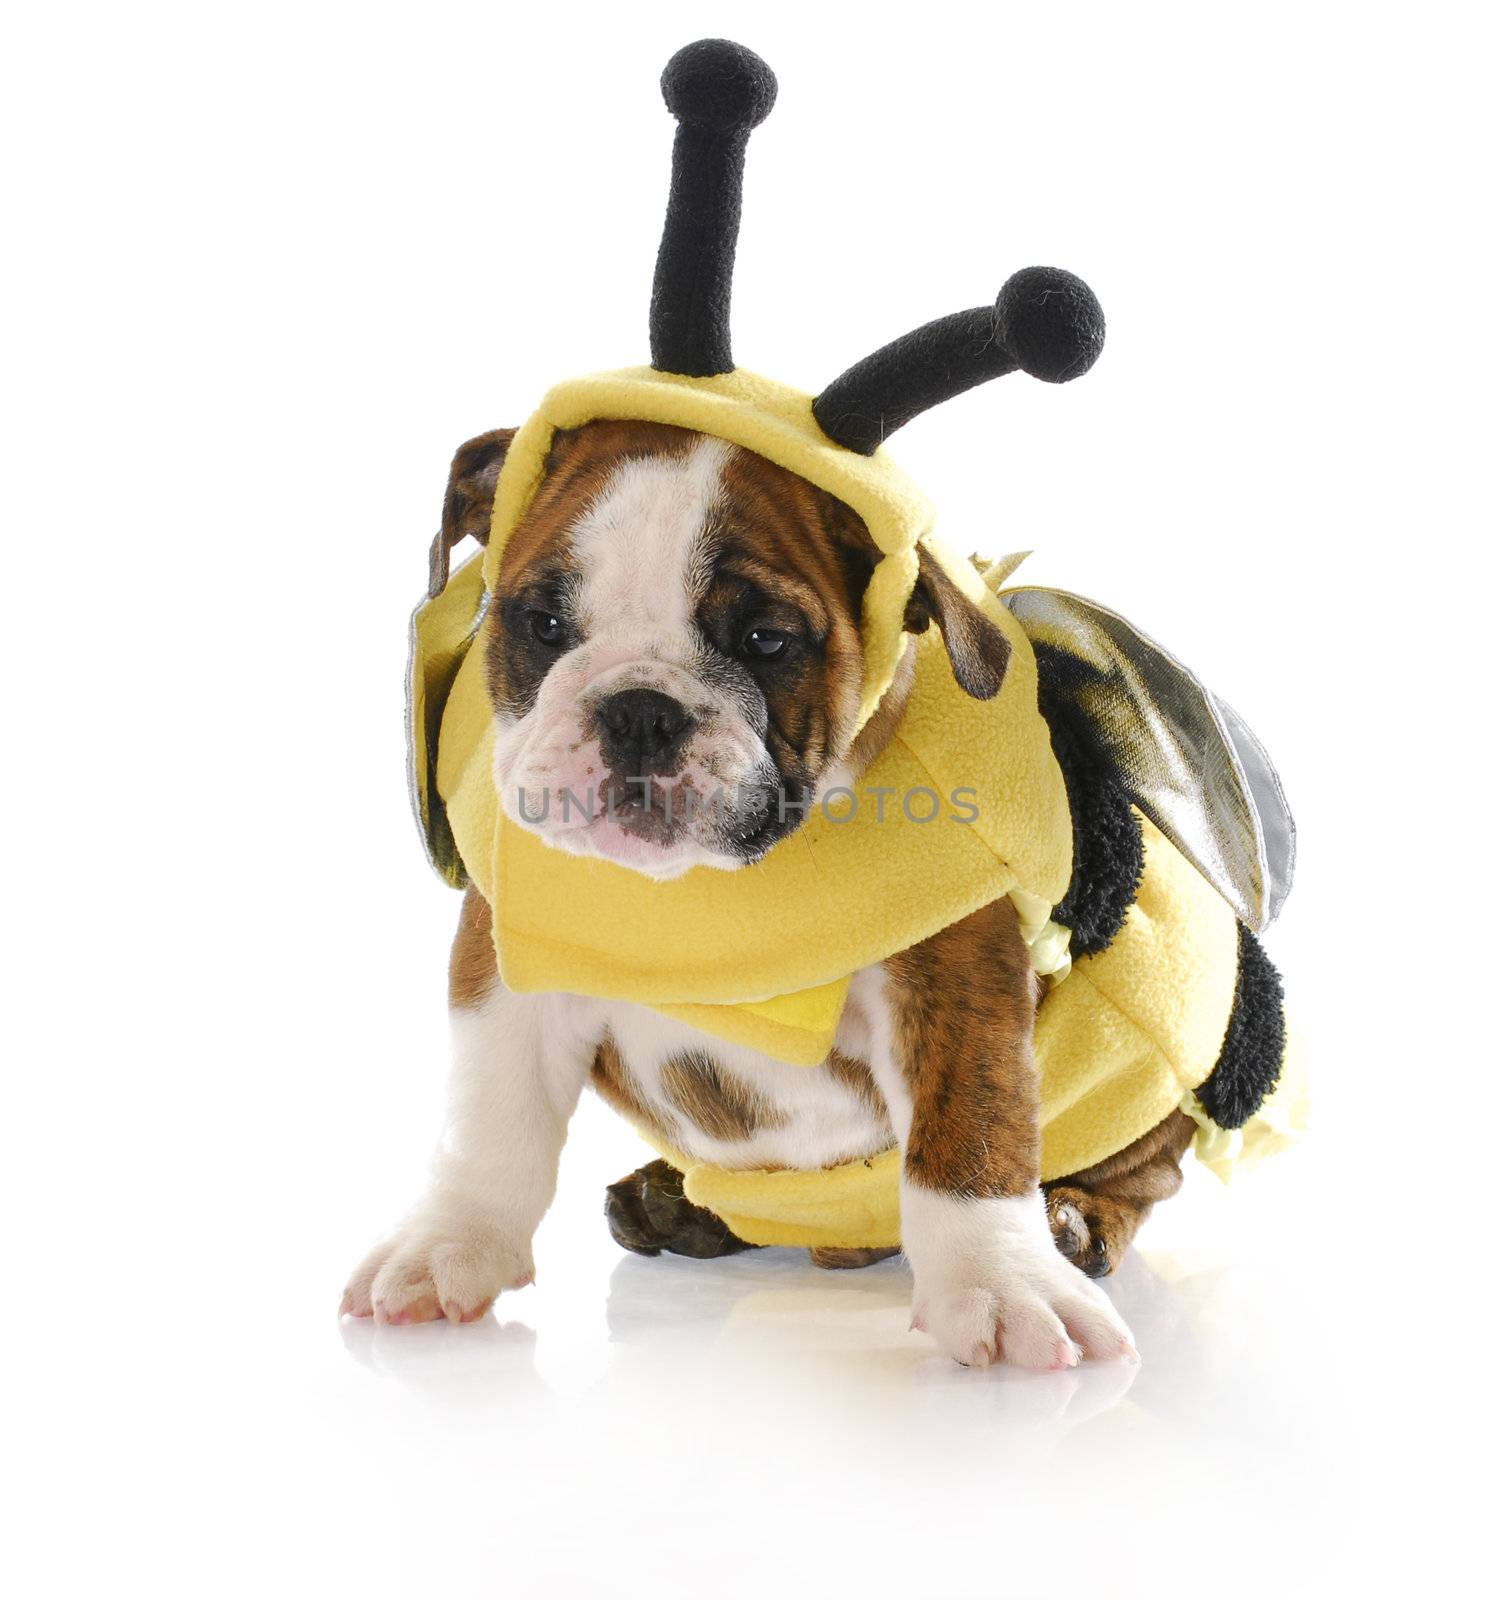 puppy dressed up like a bee by willeecole123